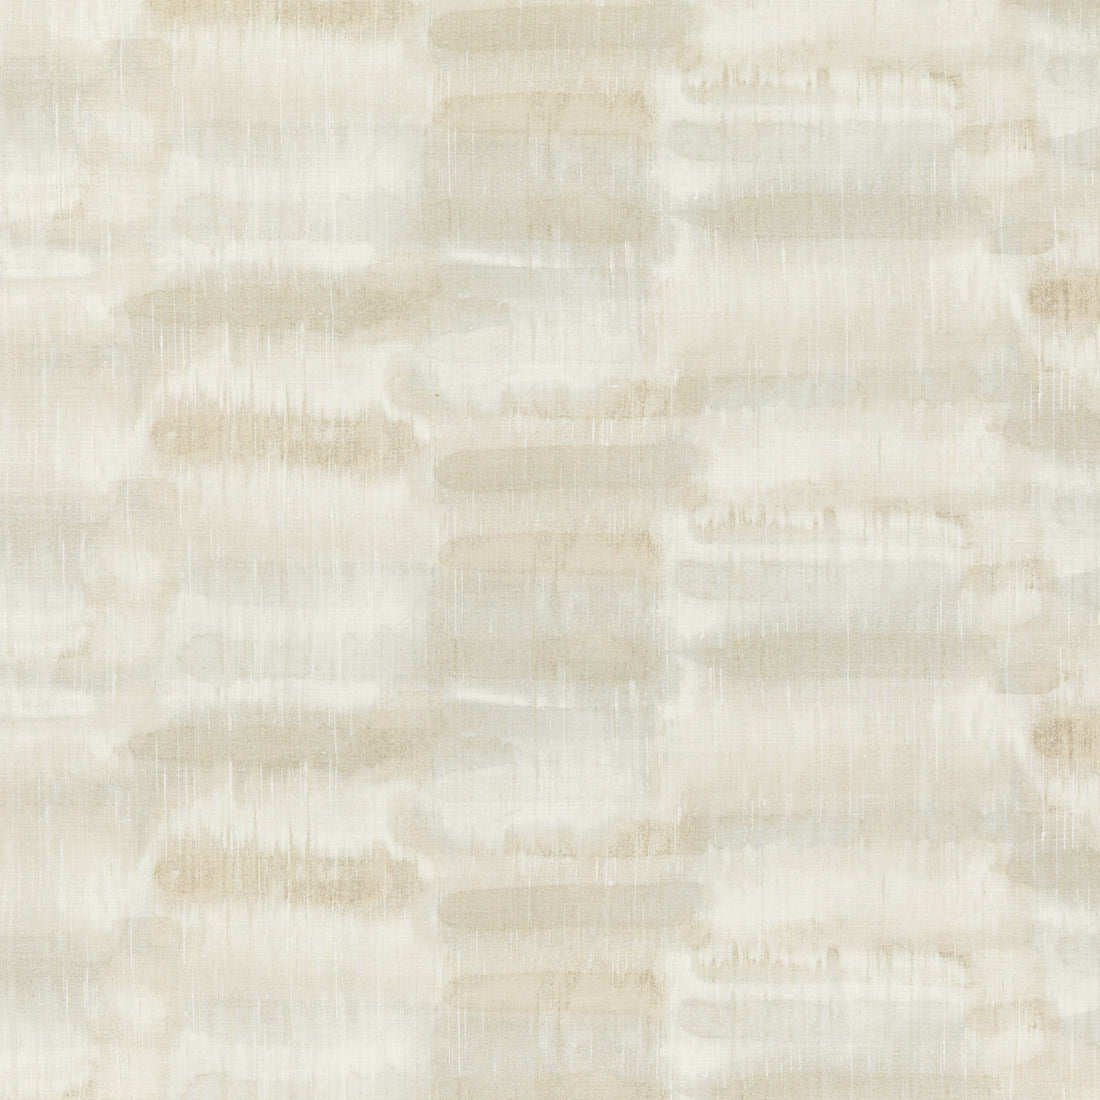 Sarabi fabric in ivory color - pattern ED75039.2.0 - by Threads in the Nala Prints collection